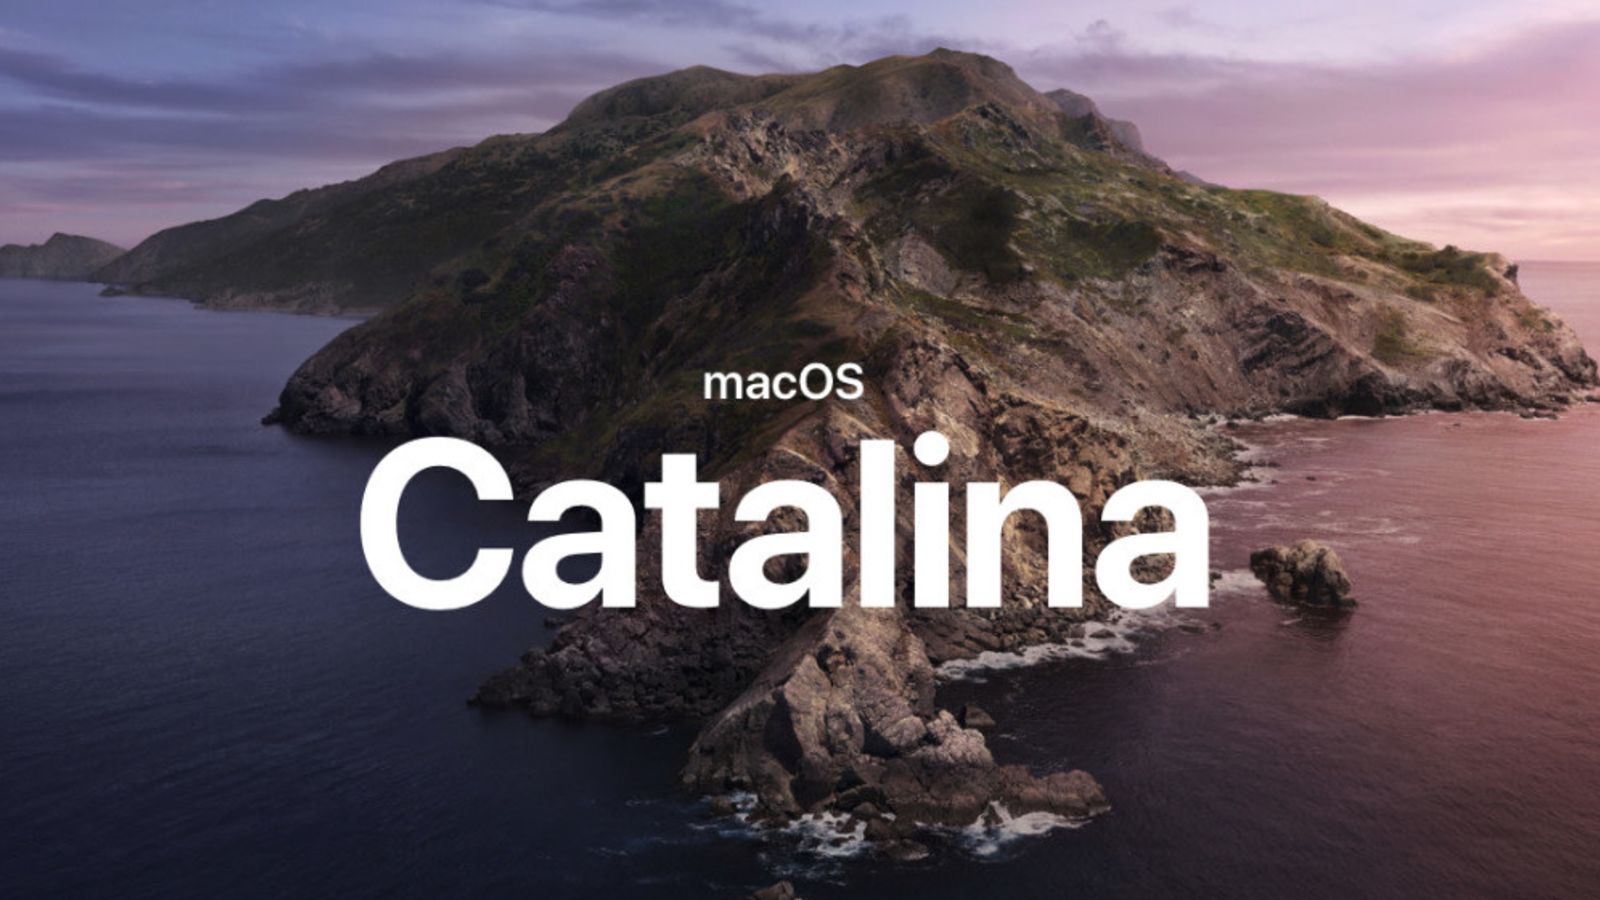 Word For Mac Os Catalina